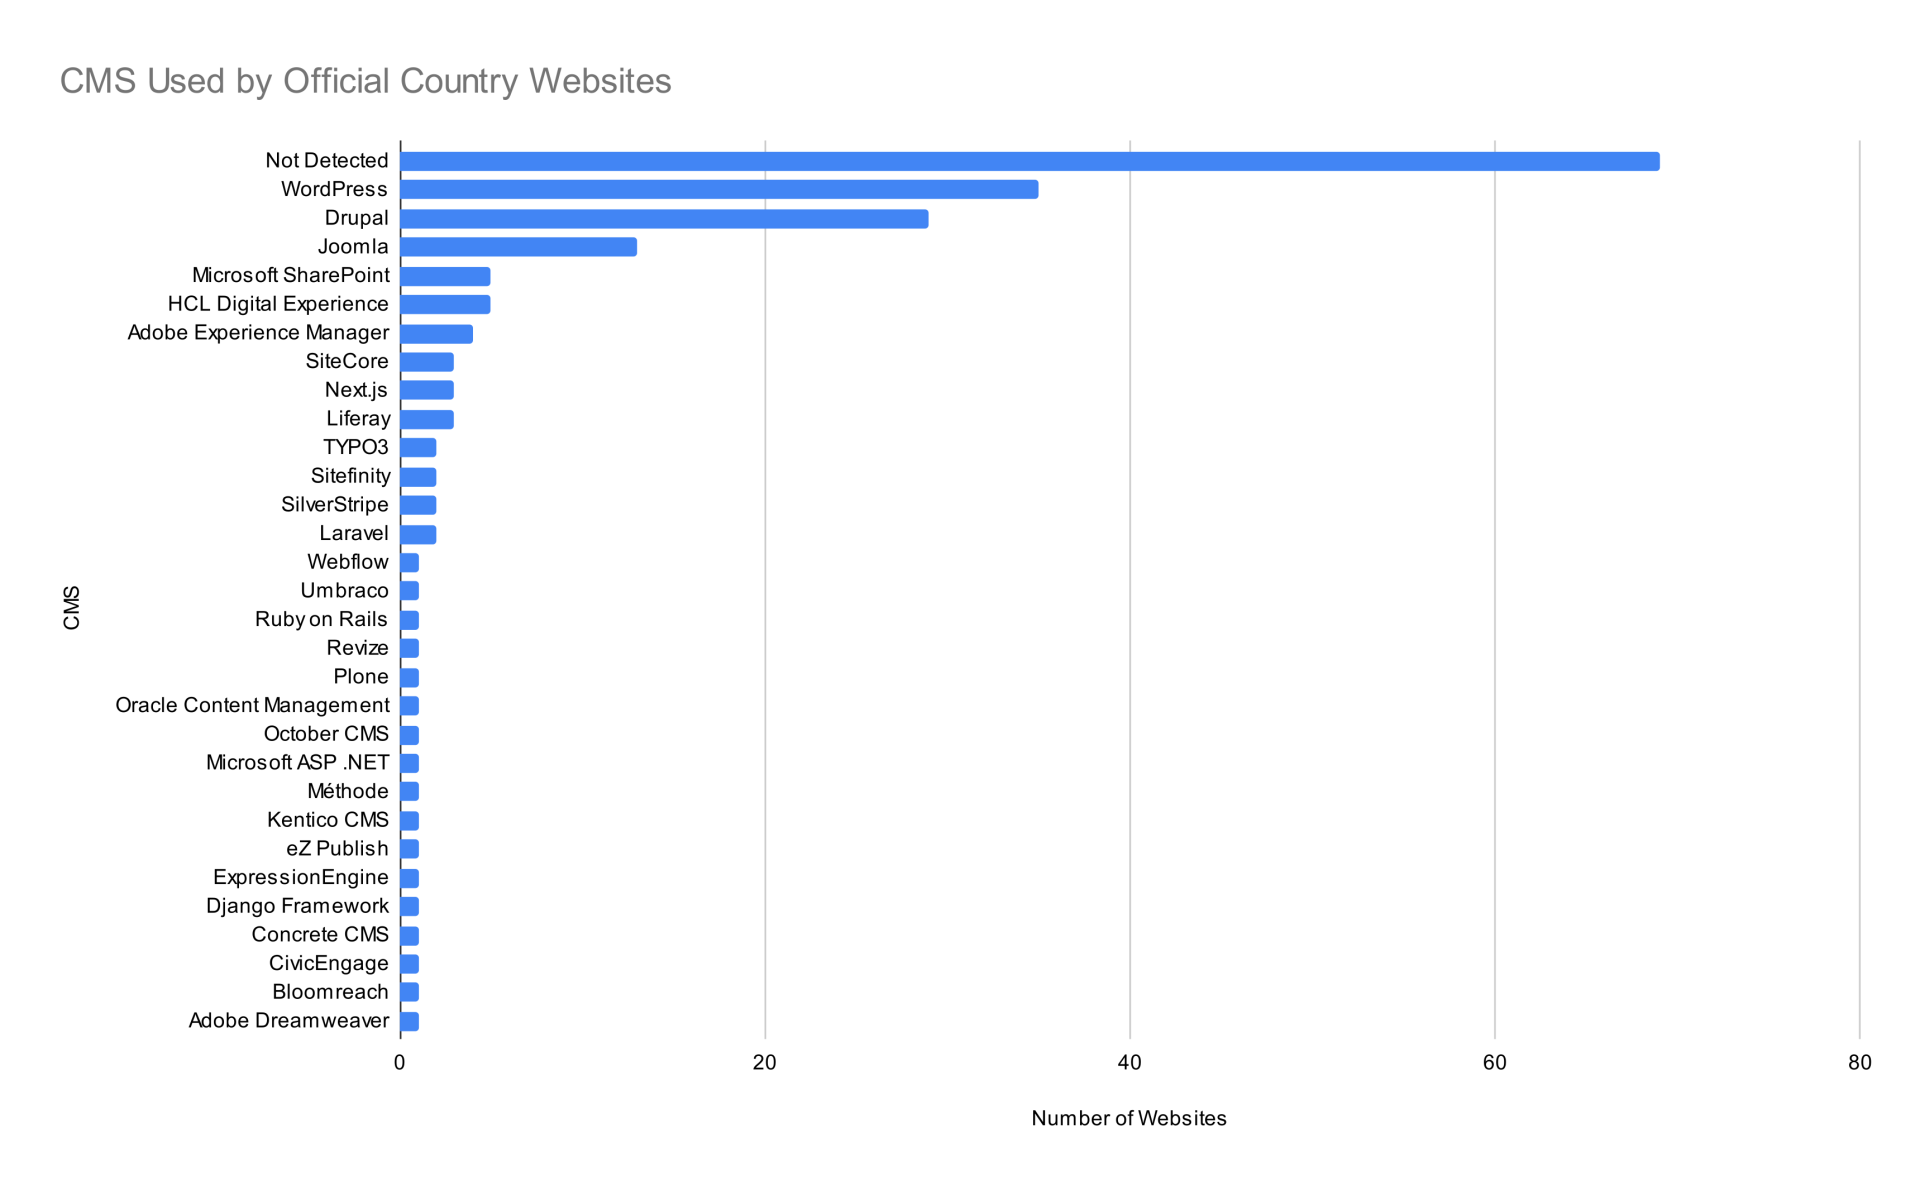 CMS Usage of Official Country Websites